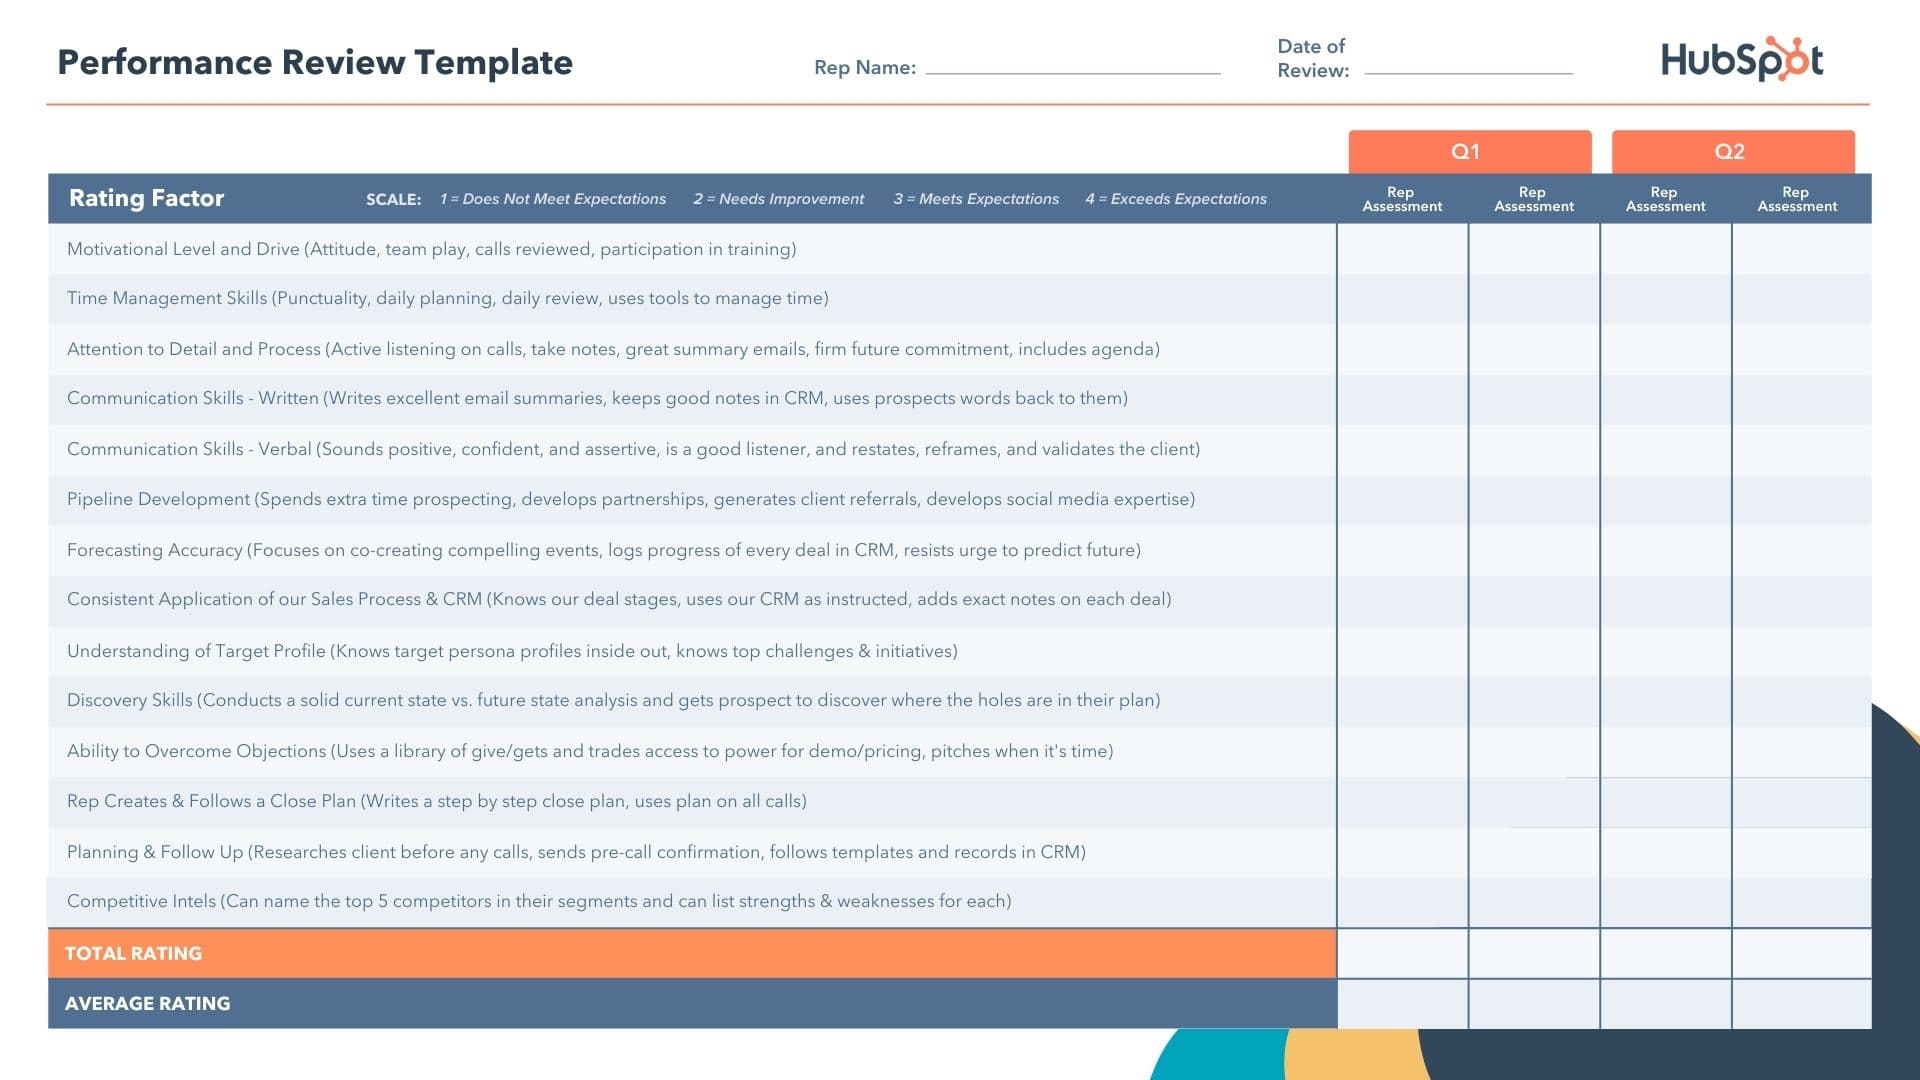 The Sales Manager's Guide to Performance Reviews [Free Template]